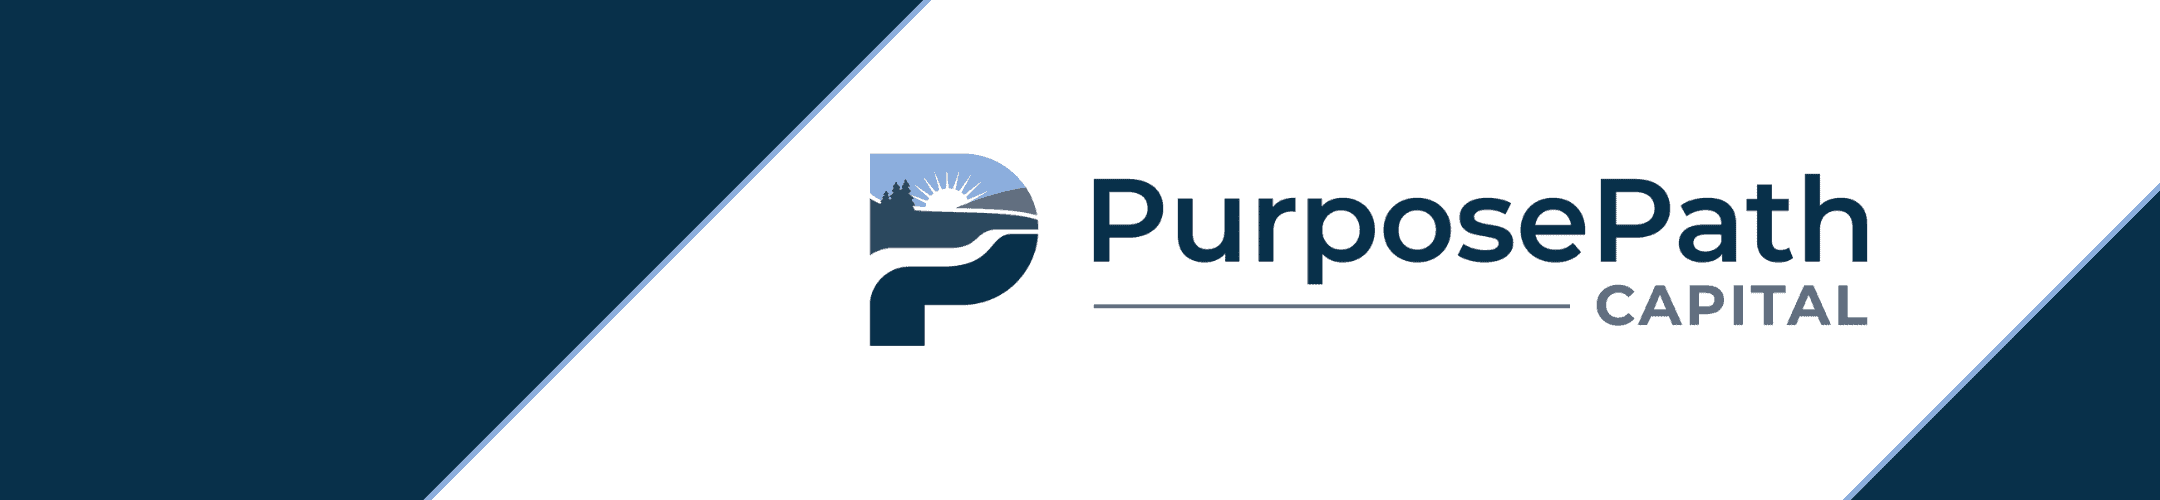 Corporate branding for purposepath capital with a sleek logo featuring a hand and sprouting plant, symbolizing growth and support.